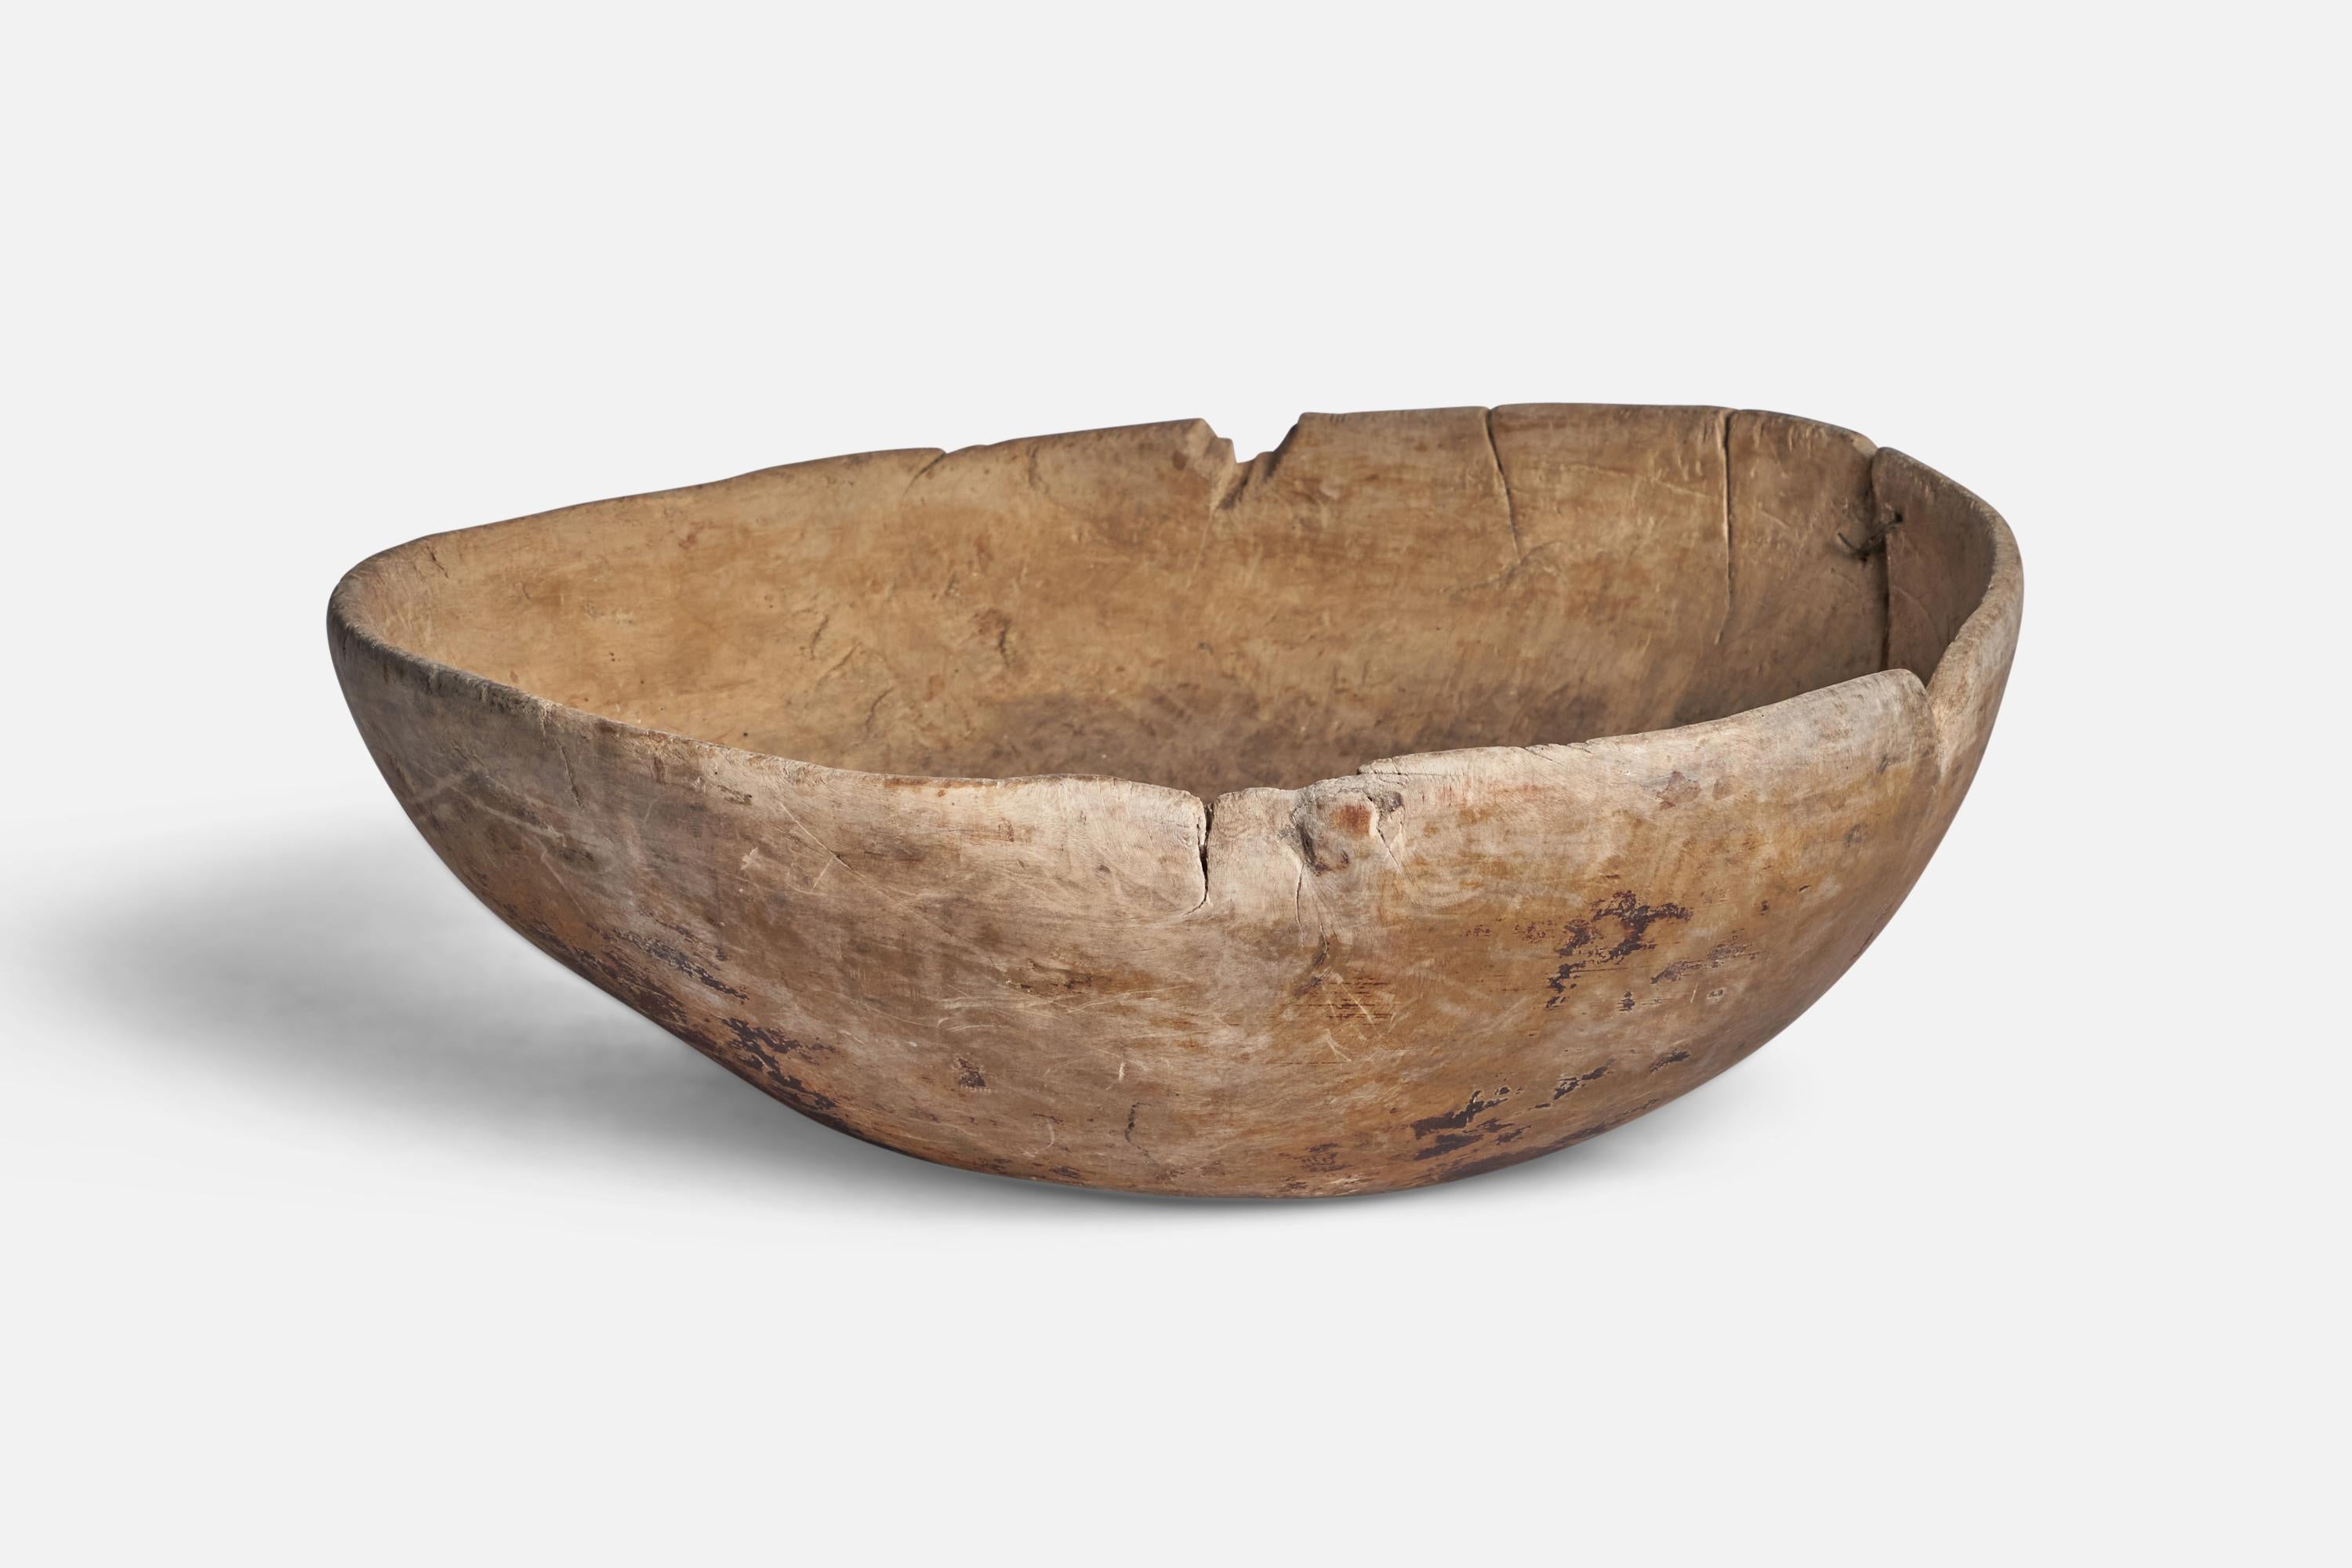 A wood bowl with metal repair produced in Sweden, 19th century.